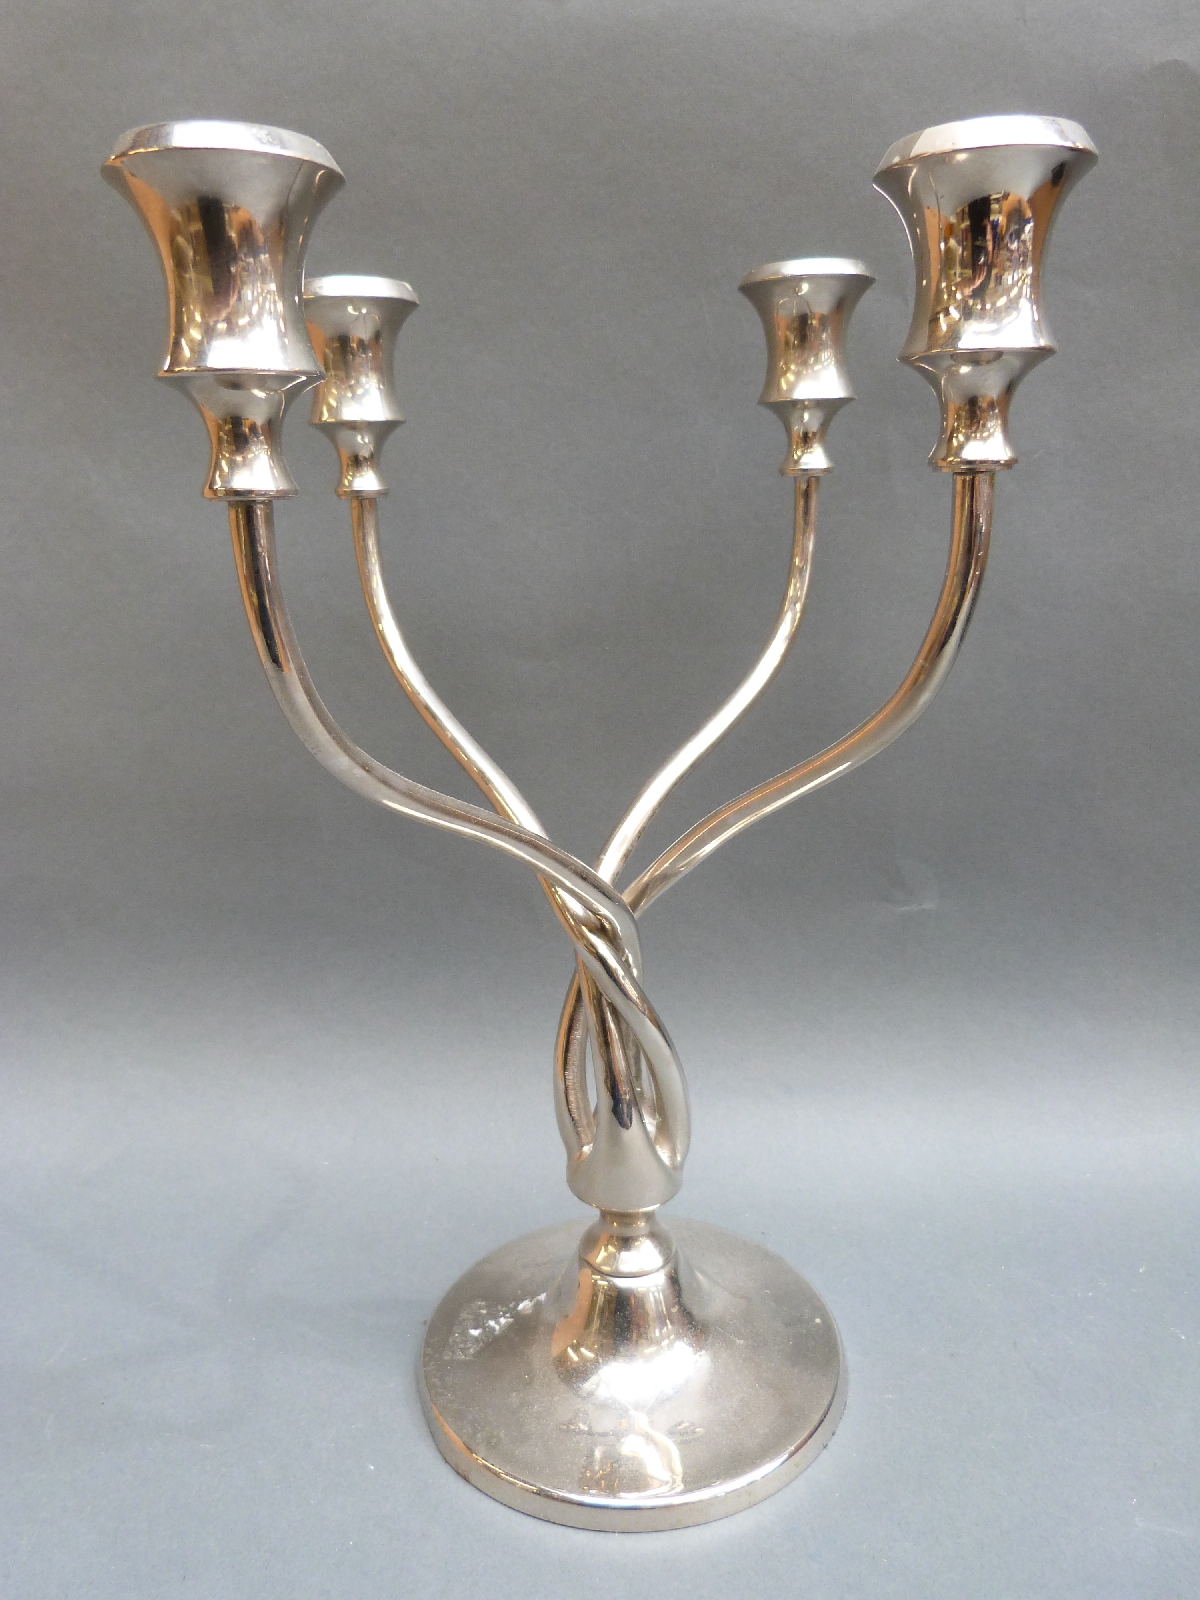 A collection of plated ware including candleabras, one with four branches; tray, fish servers, - Image 4 of 4